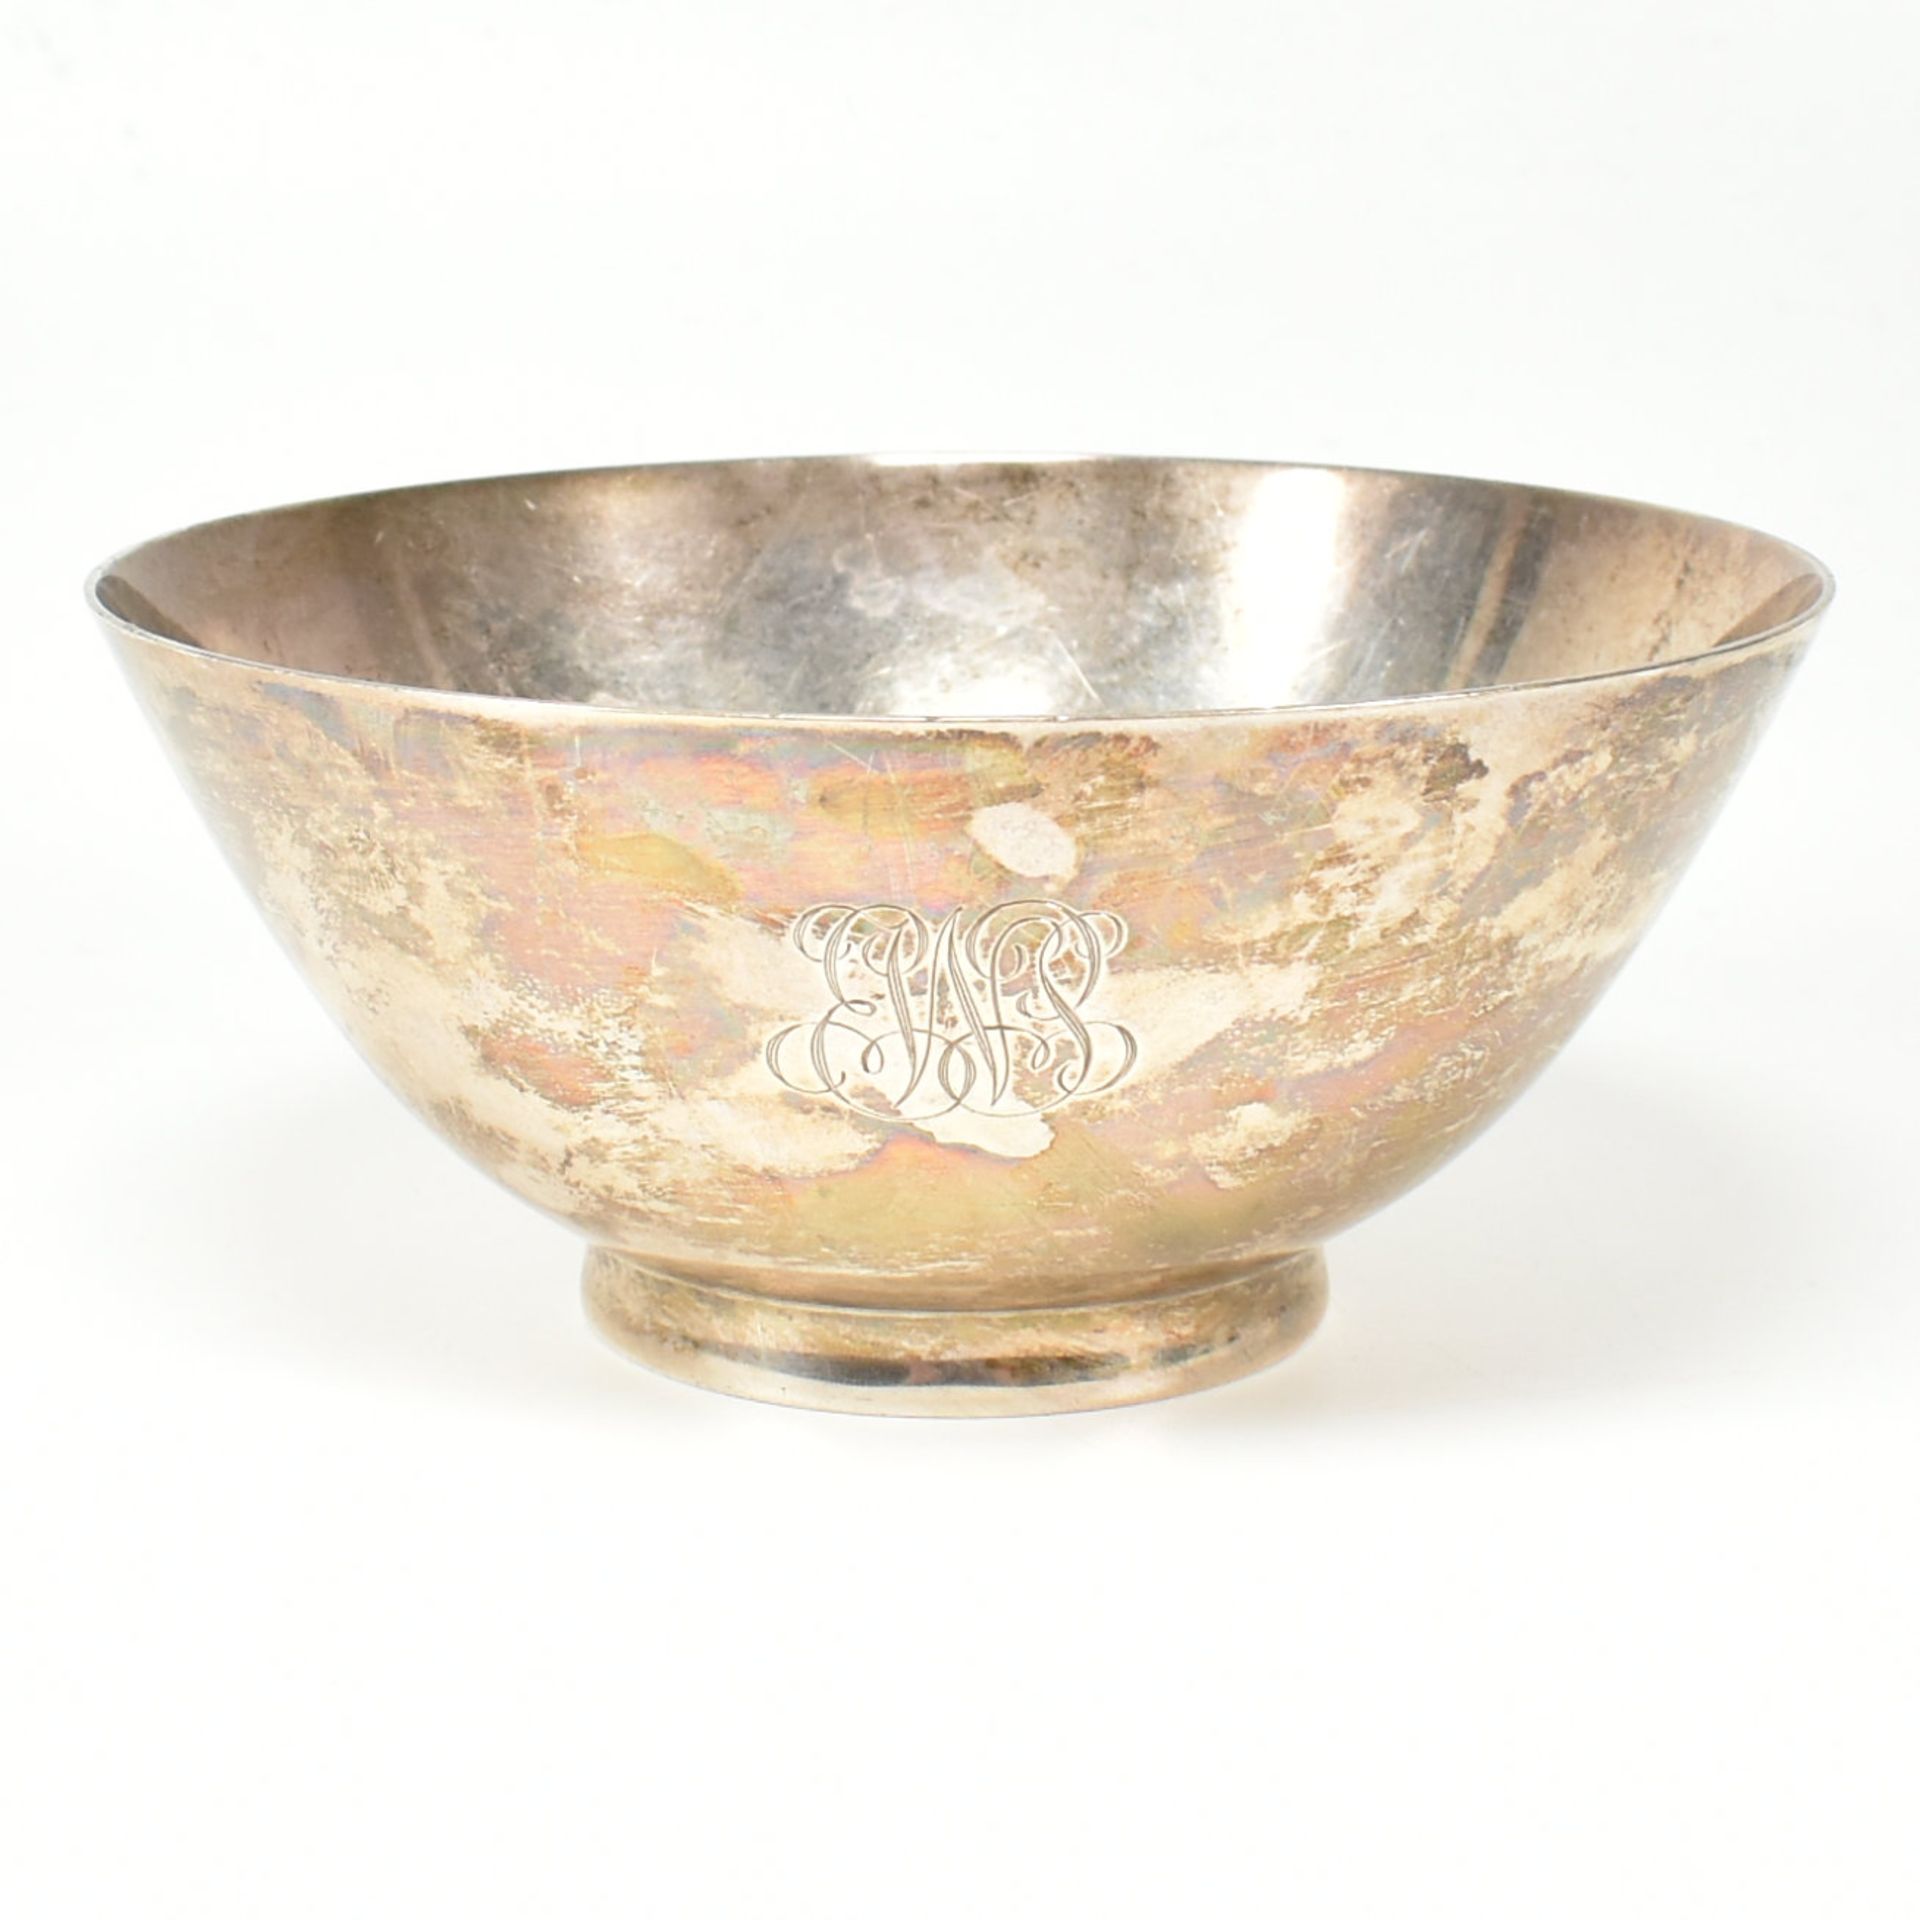 19TH CENTURY TIFFANY & CO 925 STERLING SILVER BOWL - Image 2 of 7